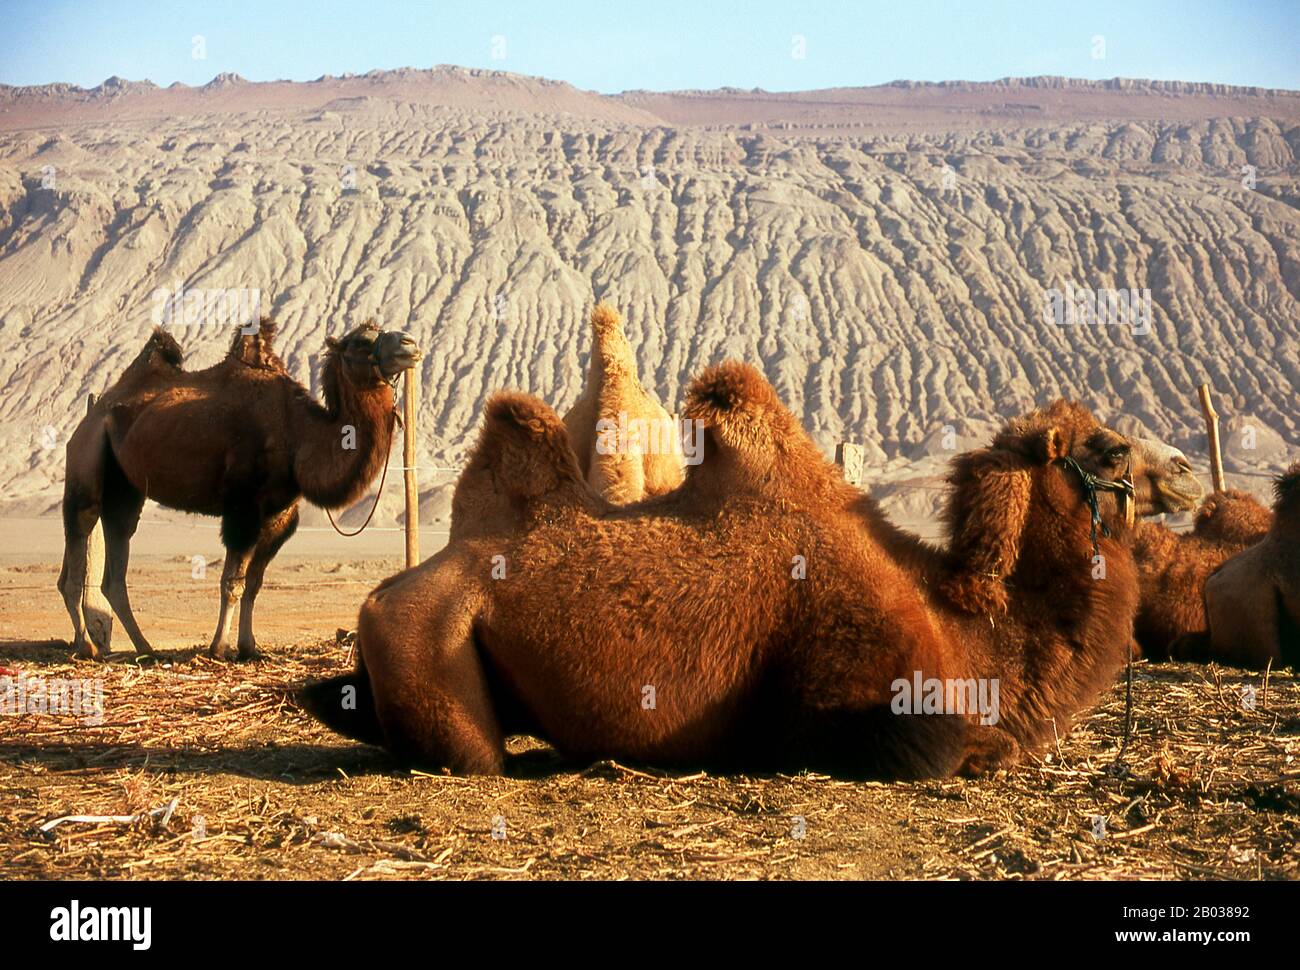 The Bactrian camel (Camelus bactrianus) is a large even-toed ungulate native to the steppes of central Asia. It is presently restricted in the wild to remote regions of the Gobi and Taklimakan Deserts of Mongolia and Xinjiang, China. The Bactrian camel has two humps on its back, in contrast to the single-humped Dromedary camel. Stock Photo